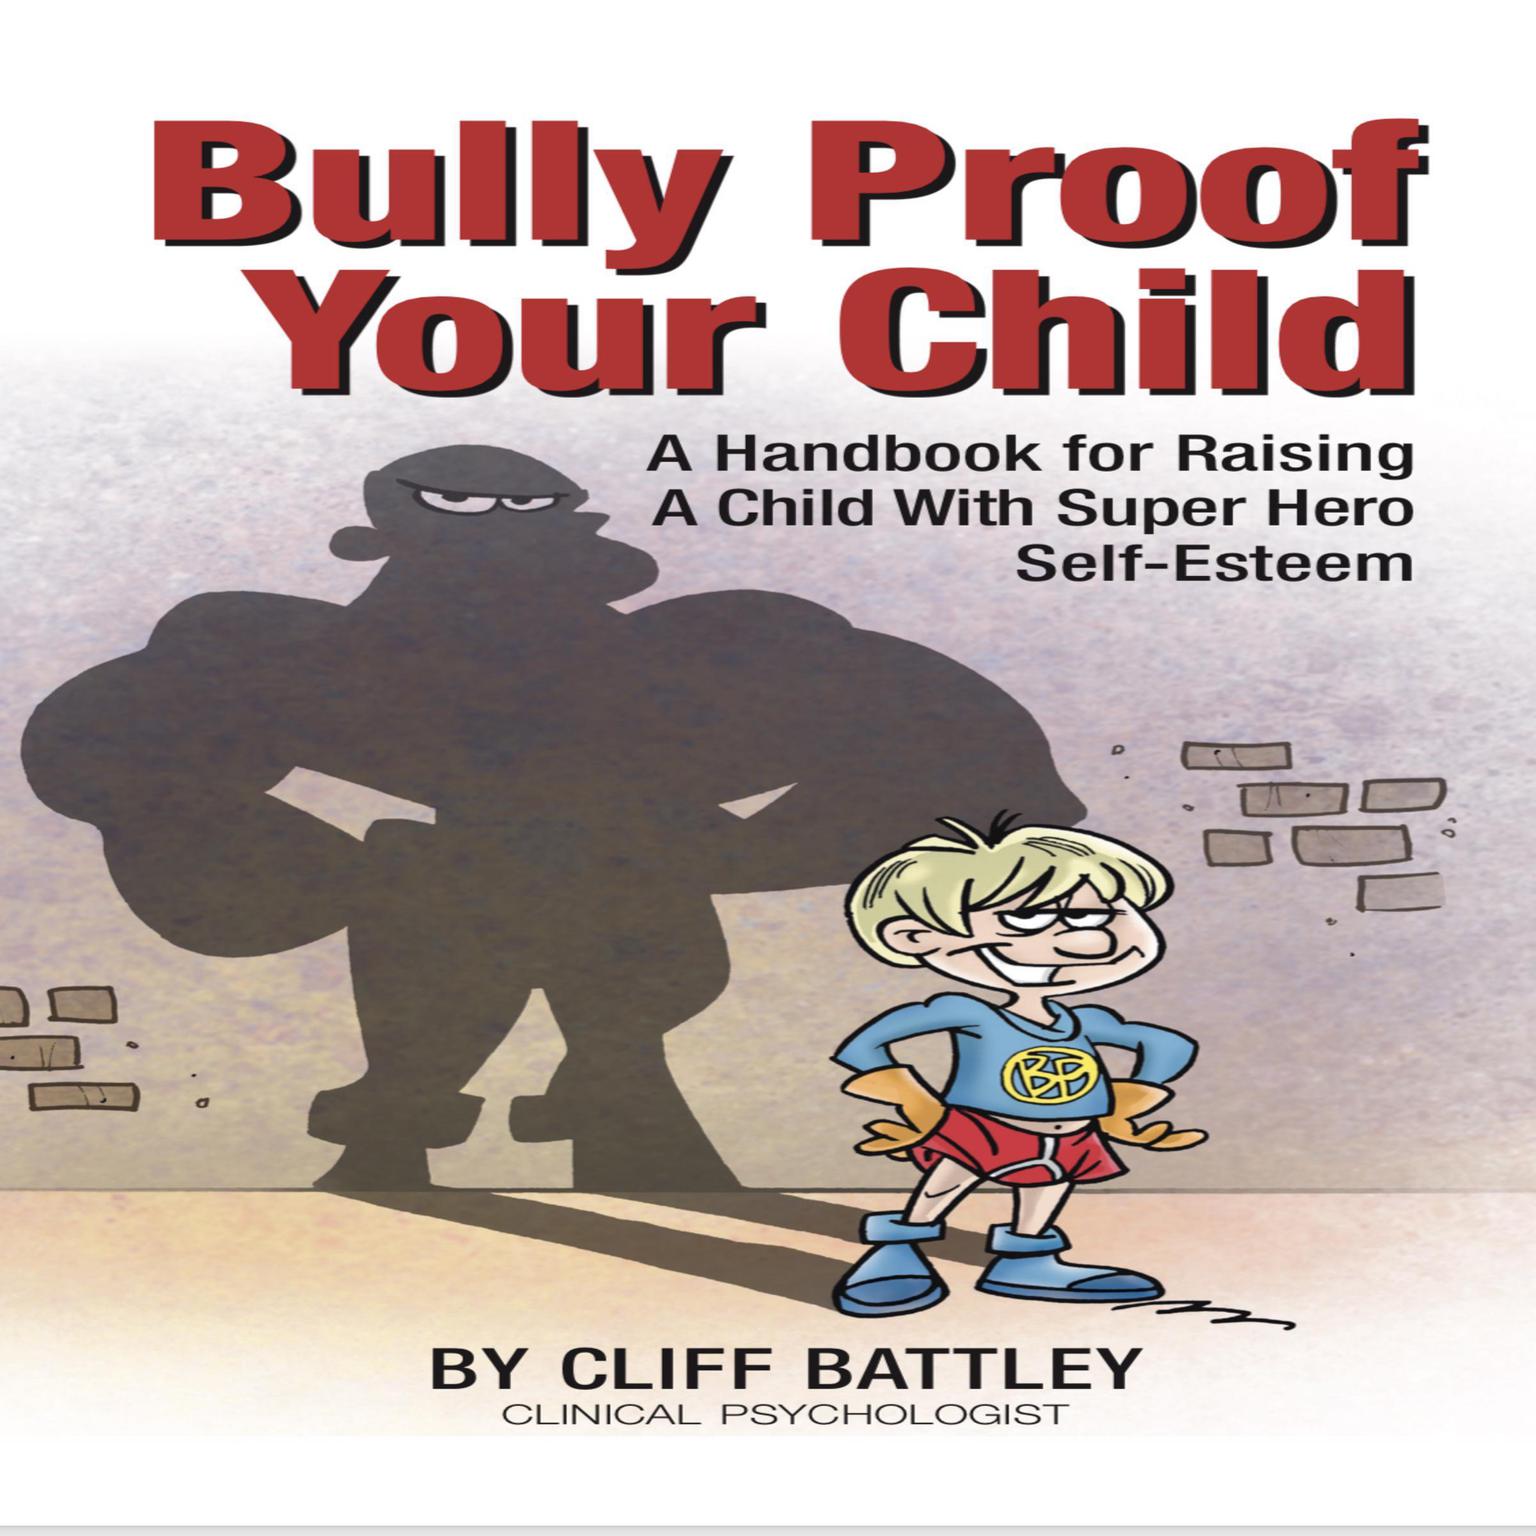 Bully Proof Your Child: A Handbook for Raising A Child With Super Hero Self-Esteem  Audiobook, by Cliff Battley